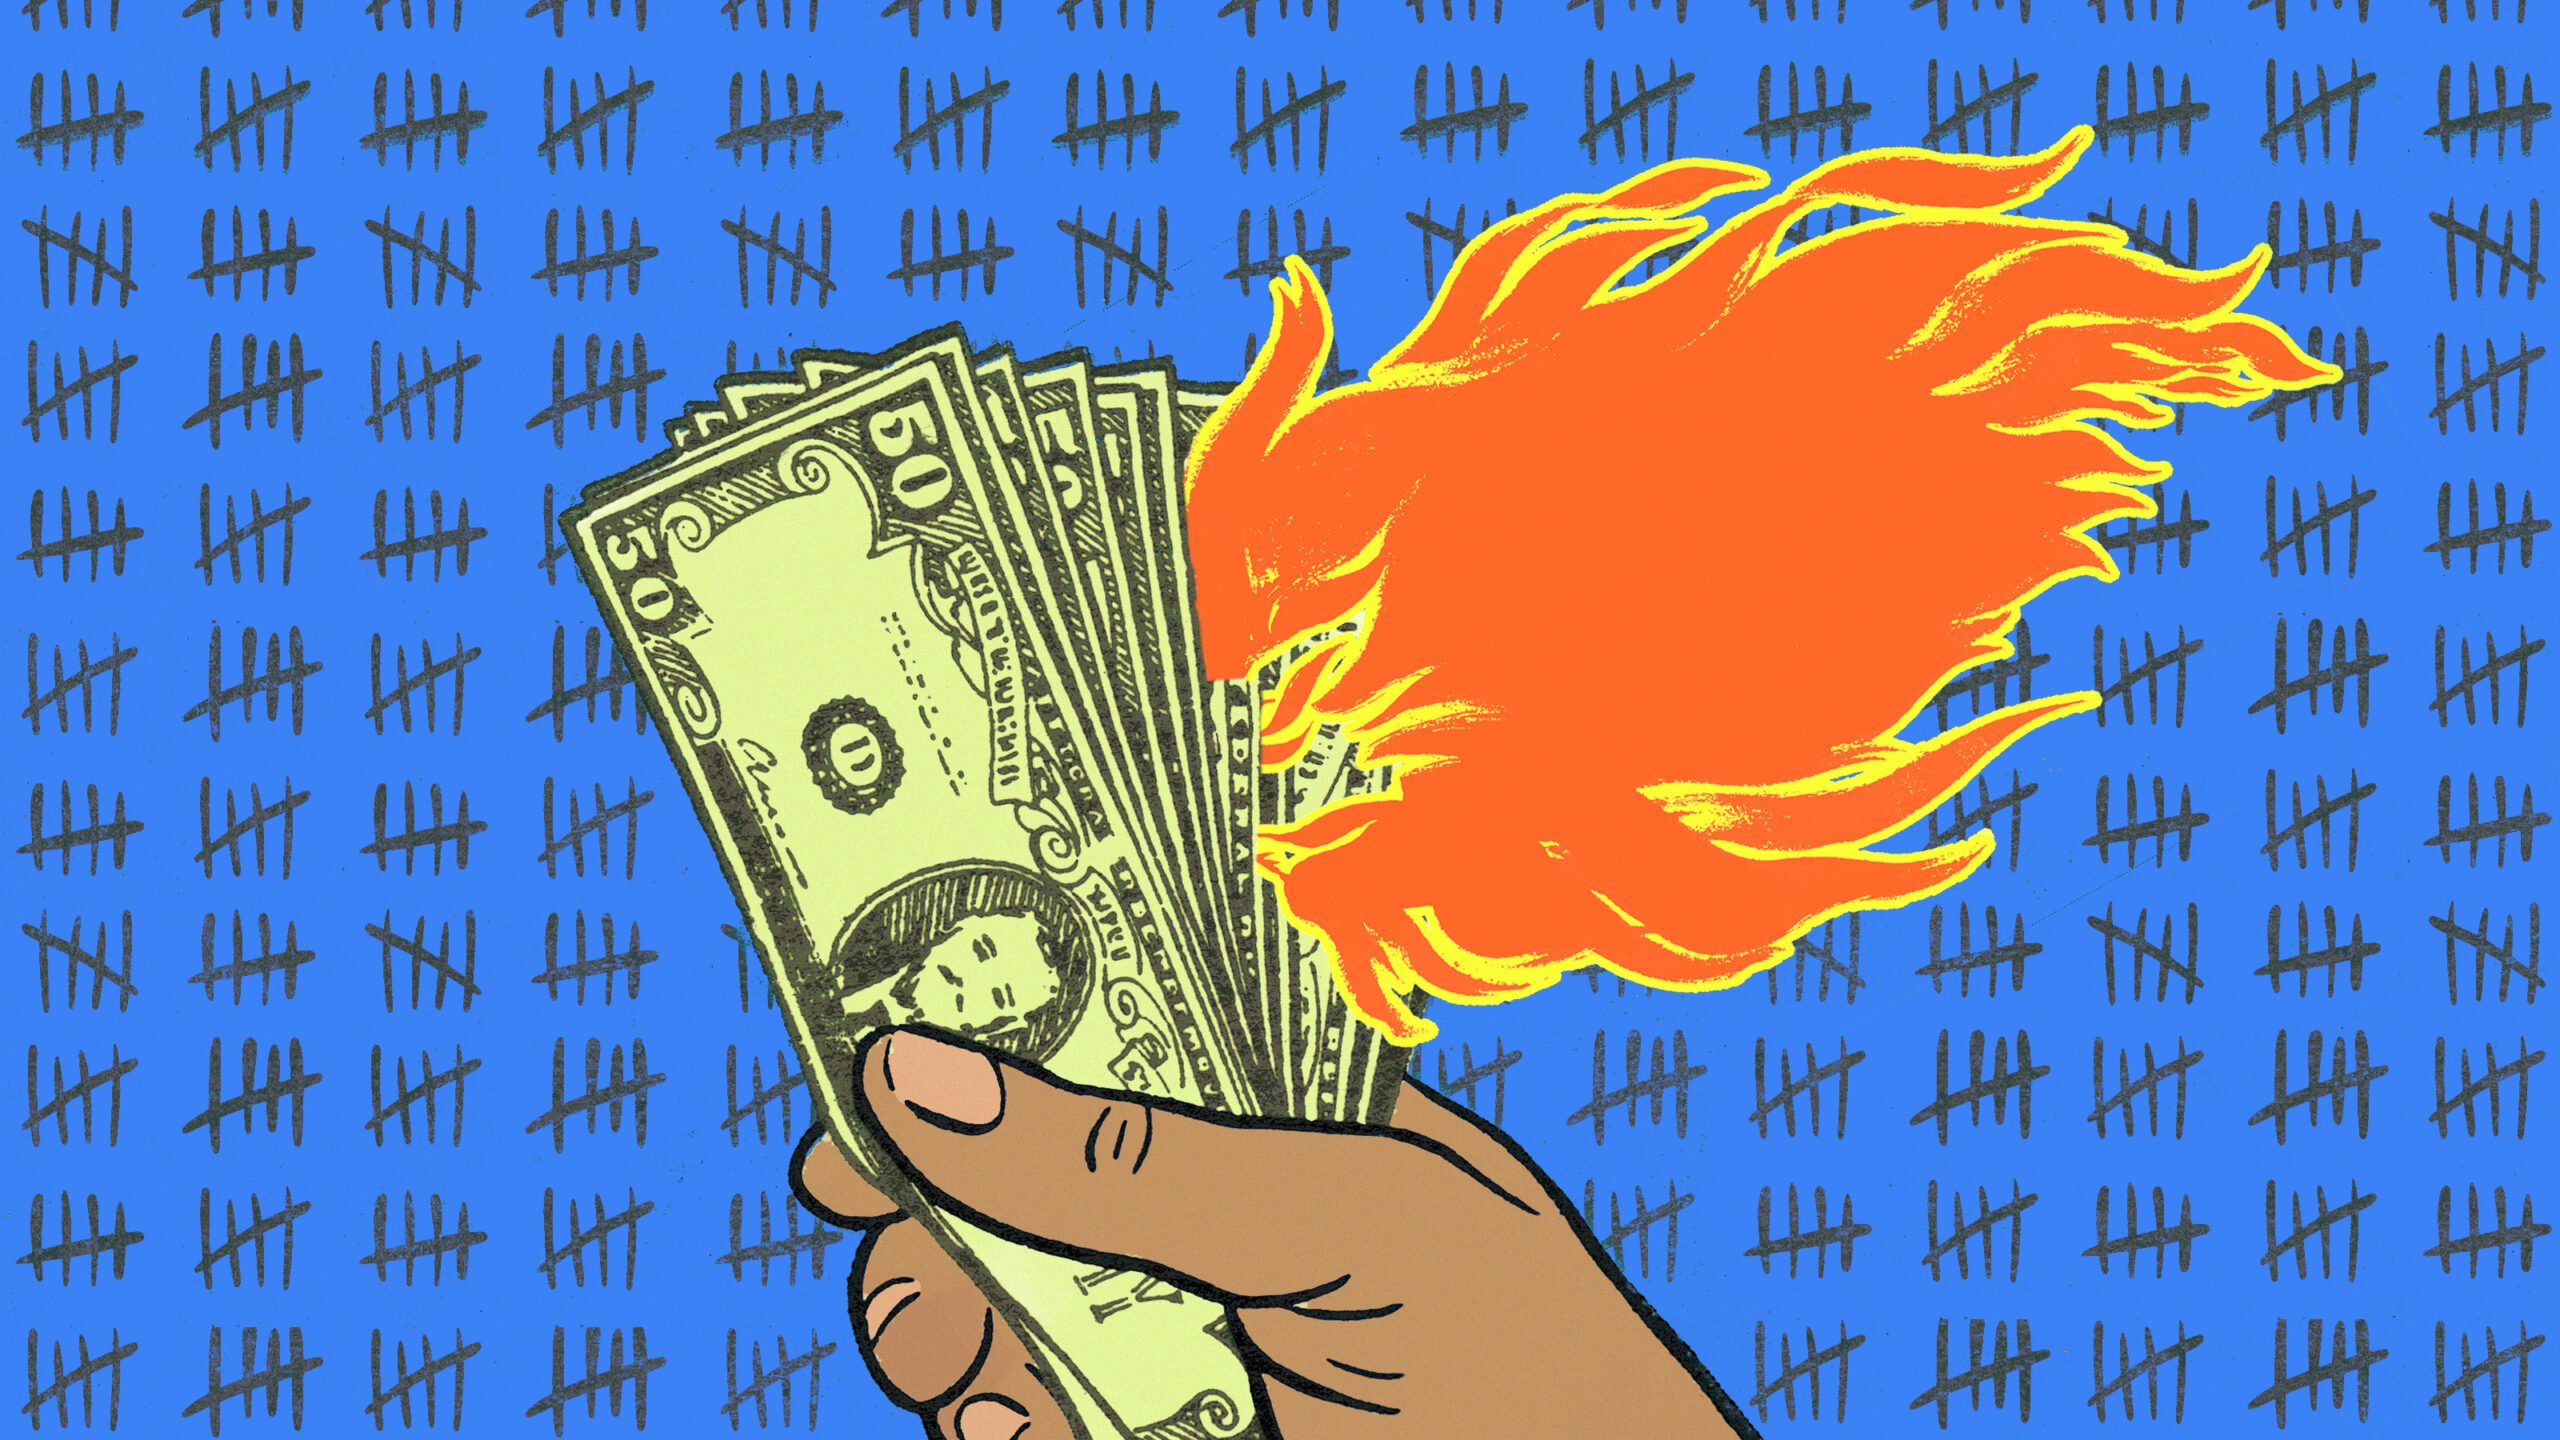 Cash to burn: Do real estate’s big players have enough in the bank?